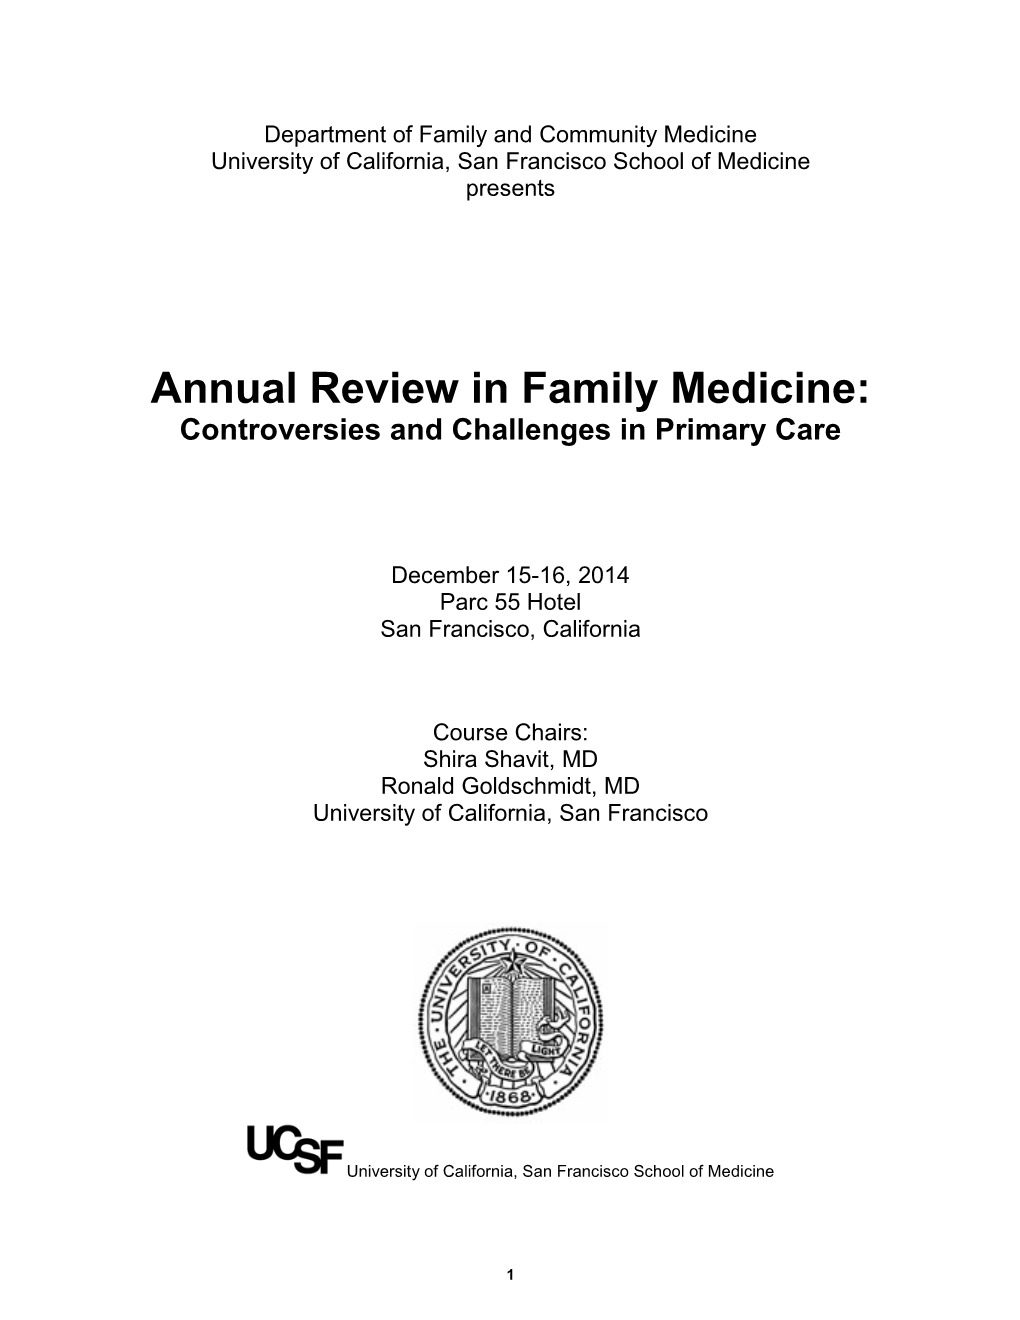 Annual Review in Family Medicine: Controversies and Challenges in Primary Care